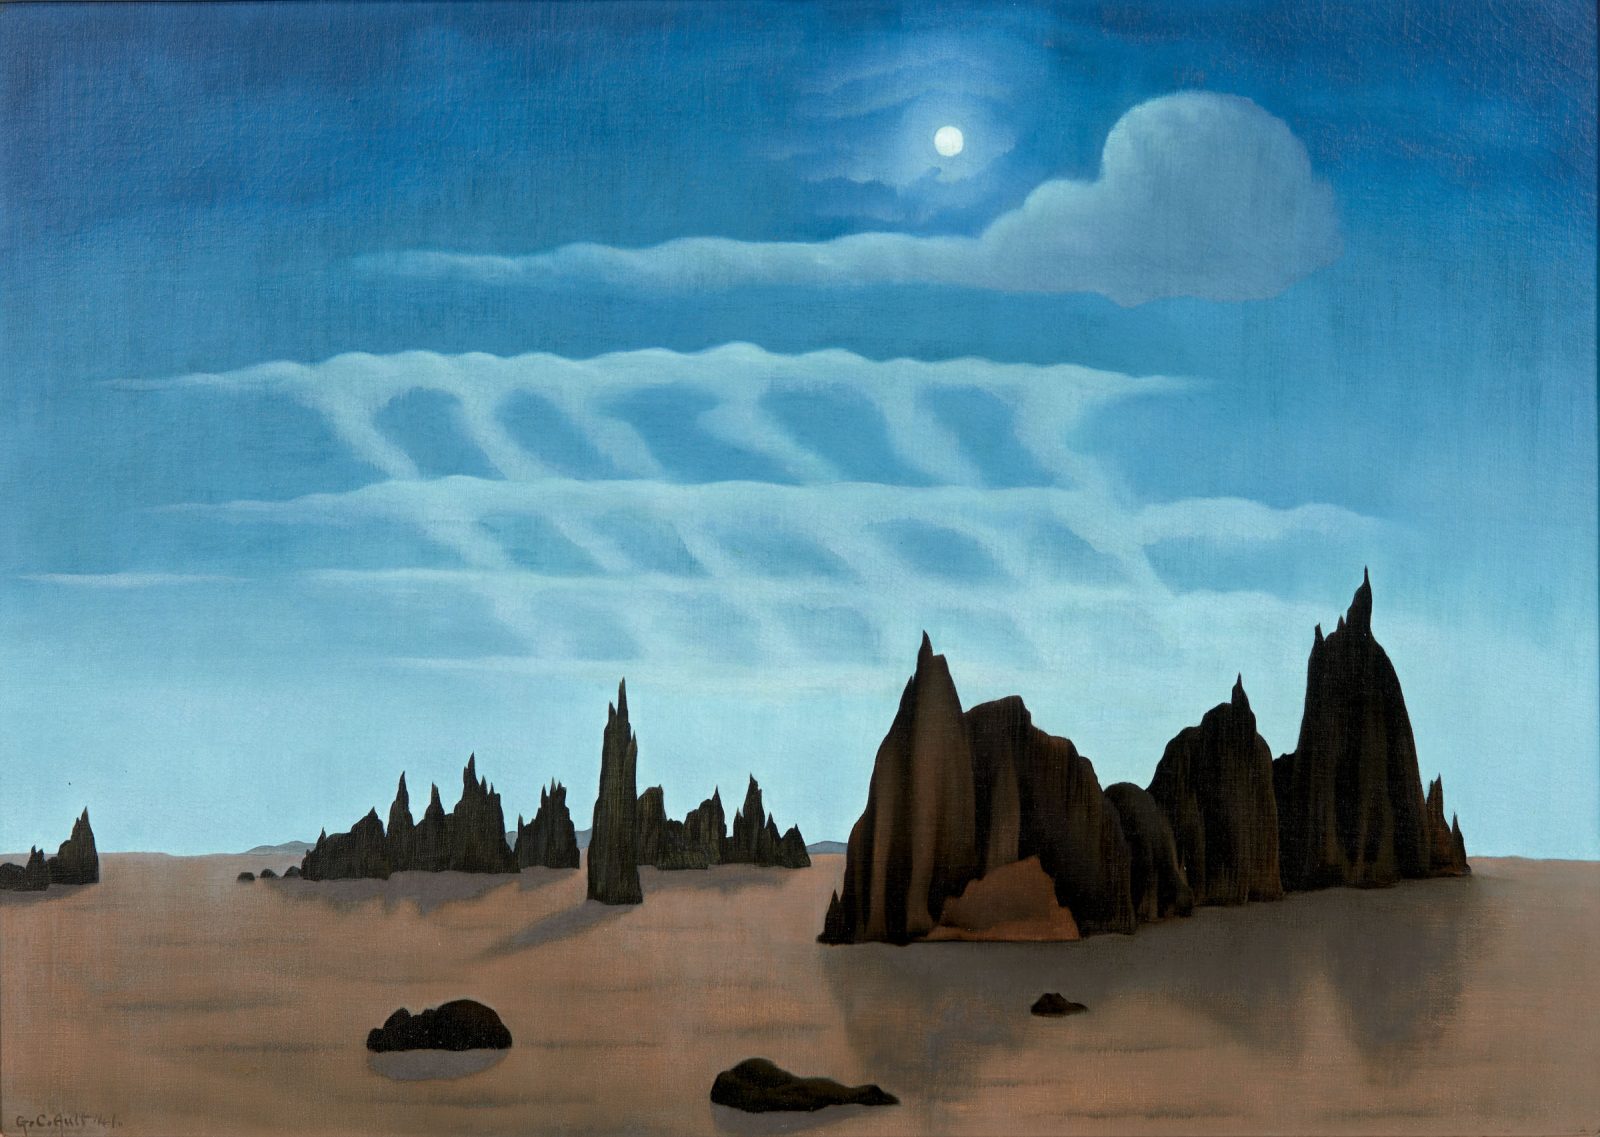 Moonlit Desert, 1941 Oil on canvas 20 x 28 inches